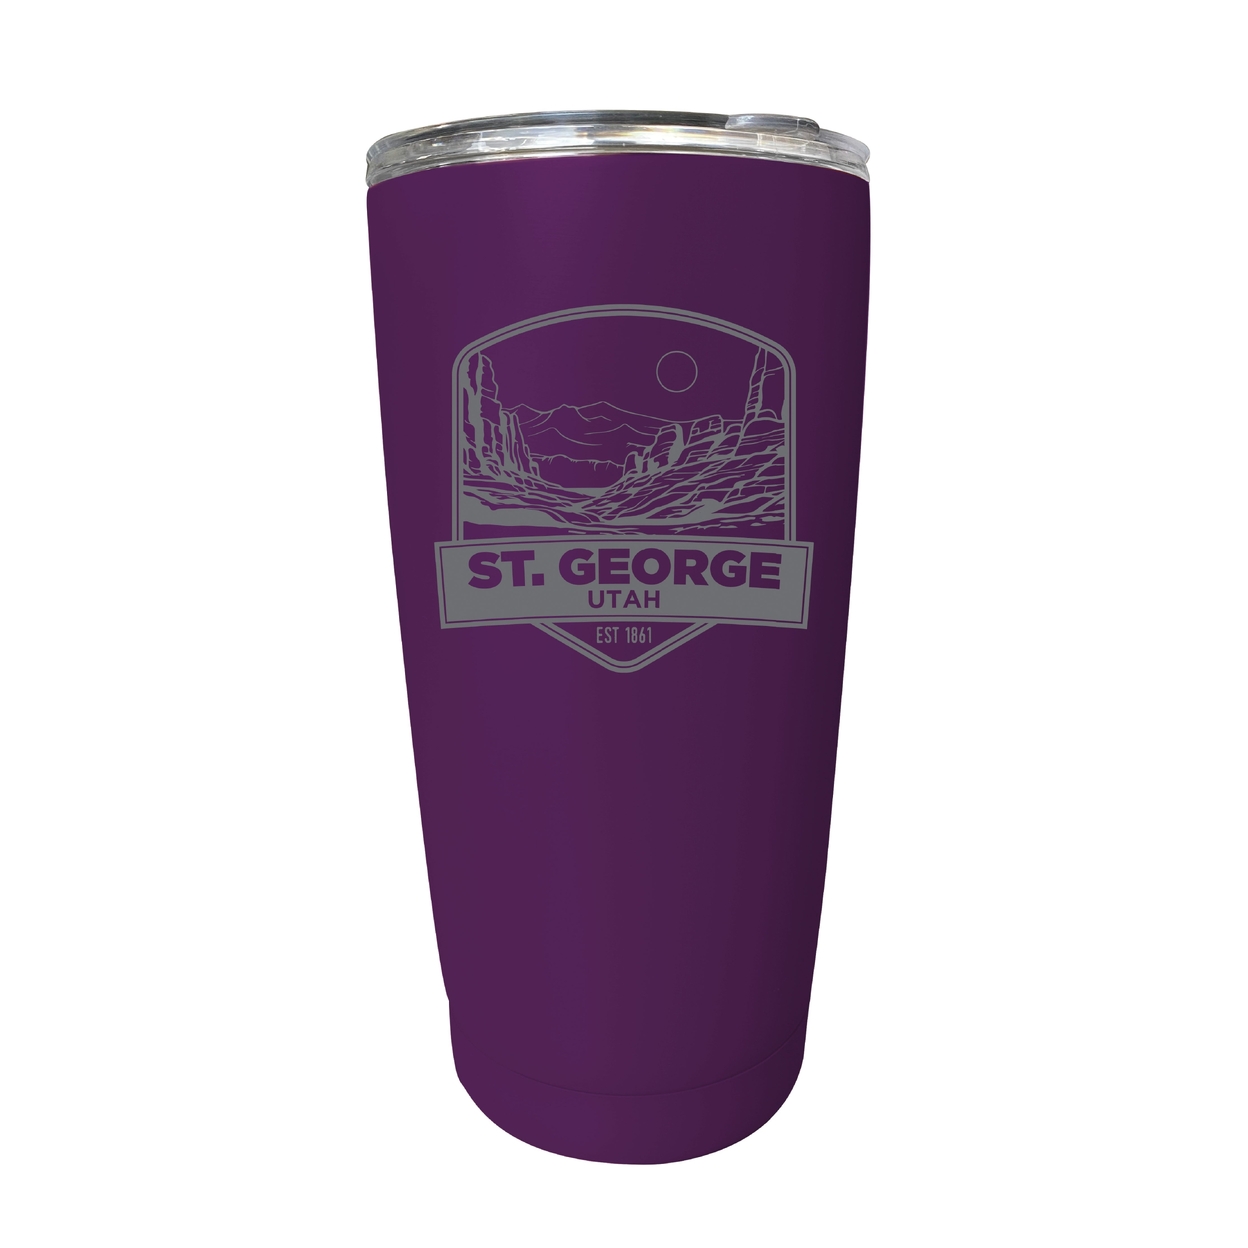 St. George Utah Souvenir 16 Oz Engraved Stainless Steel Insulated Tumbler - White,,Single Unit